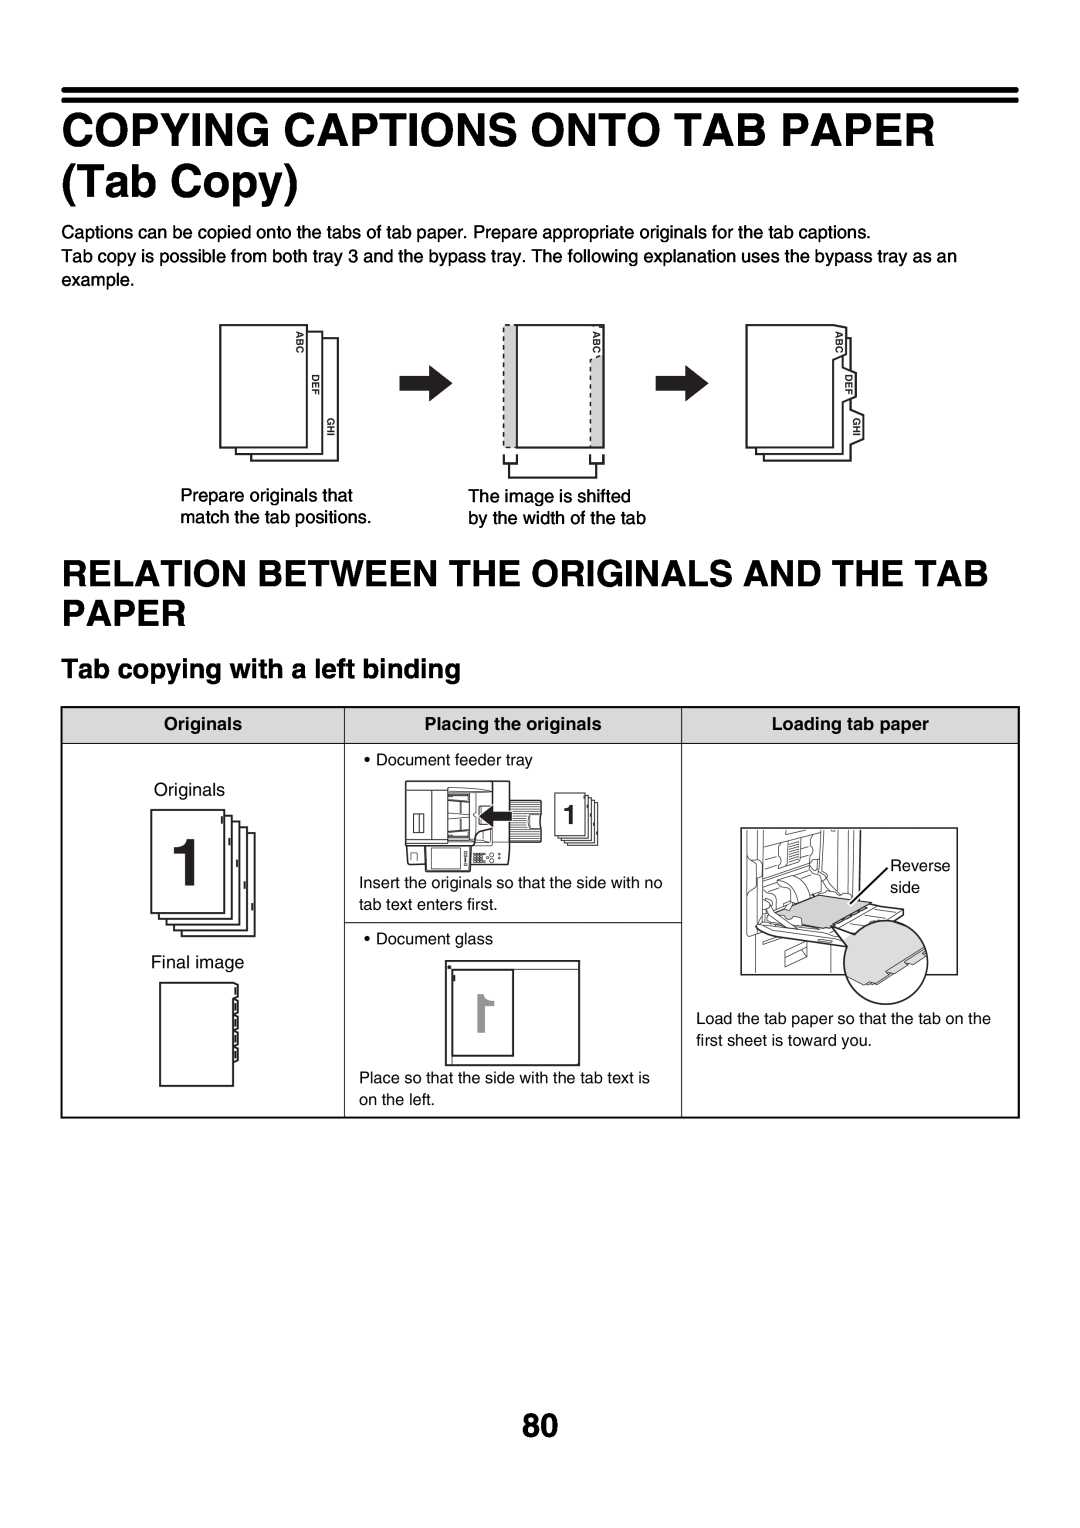 Sharp MX-5500N, MX-6200N manual COPYING CAPTIONS ONTO TAB PAPER Tab Copy, Relation Between The Originals And The Tab Paper 